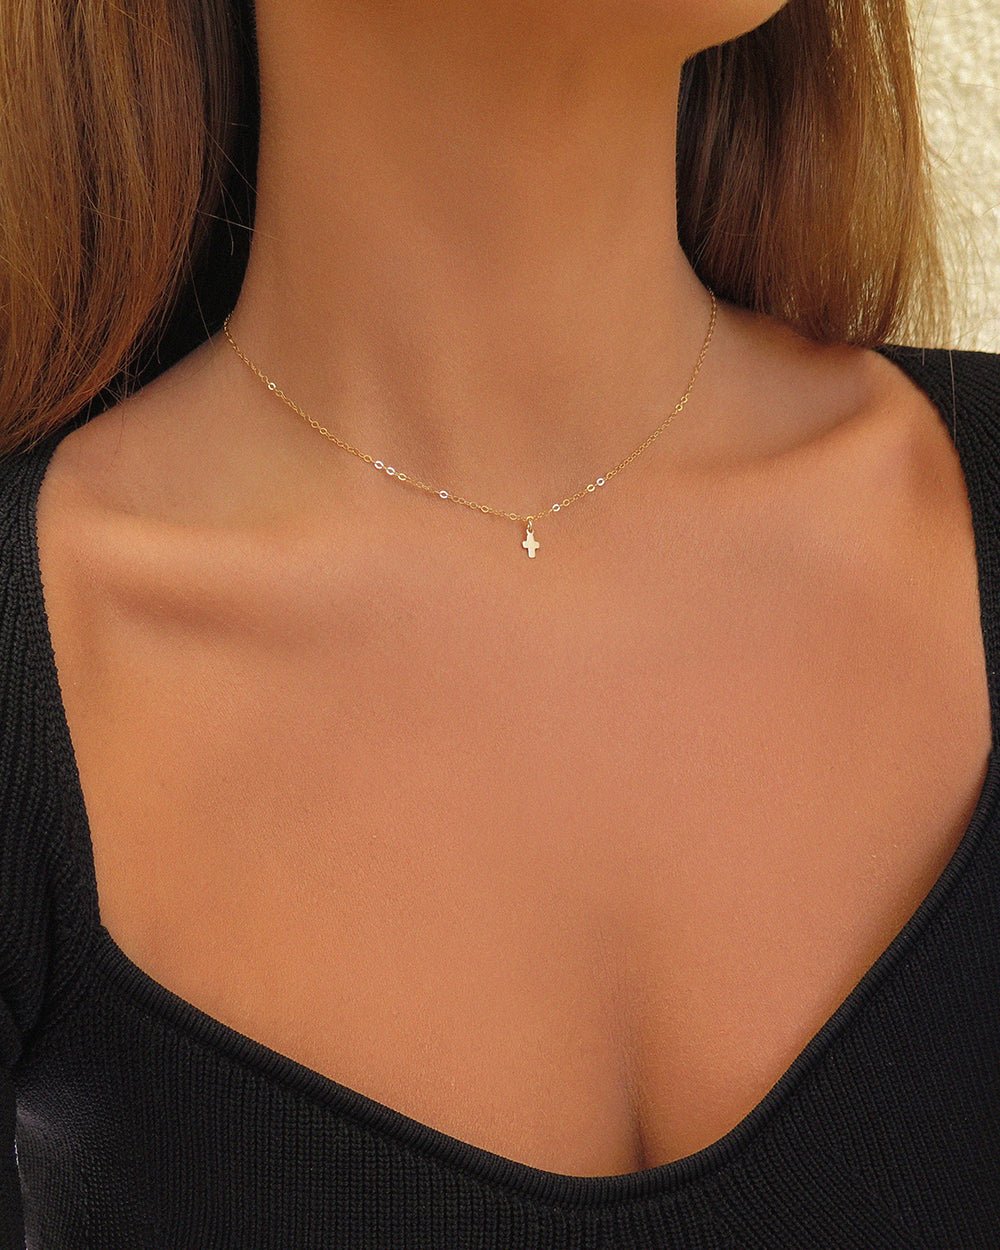 Load image into Gallery viewer, SINGLE CROSS NECKLACE - The Littl - 14k Yellow Gold Fill - Deluxe Chain Necklaces
